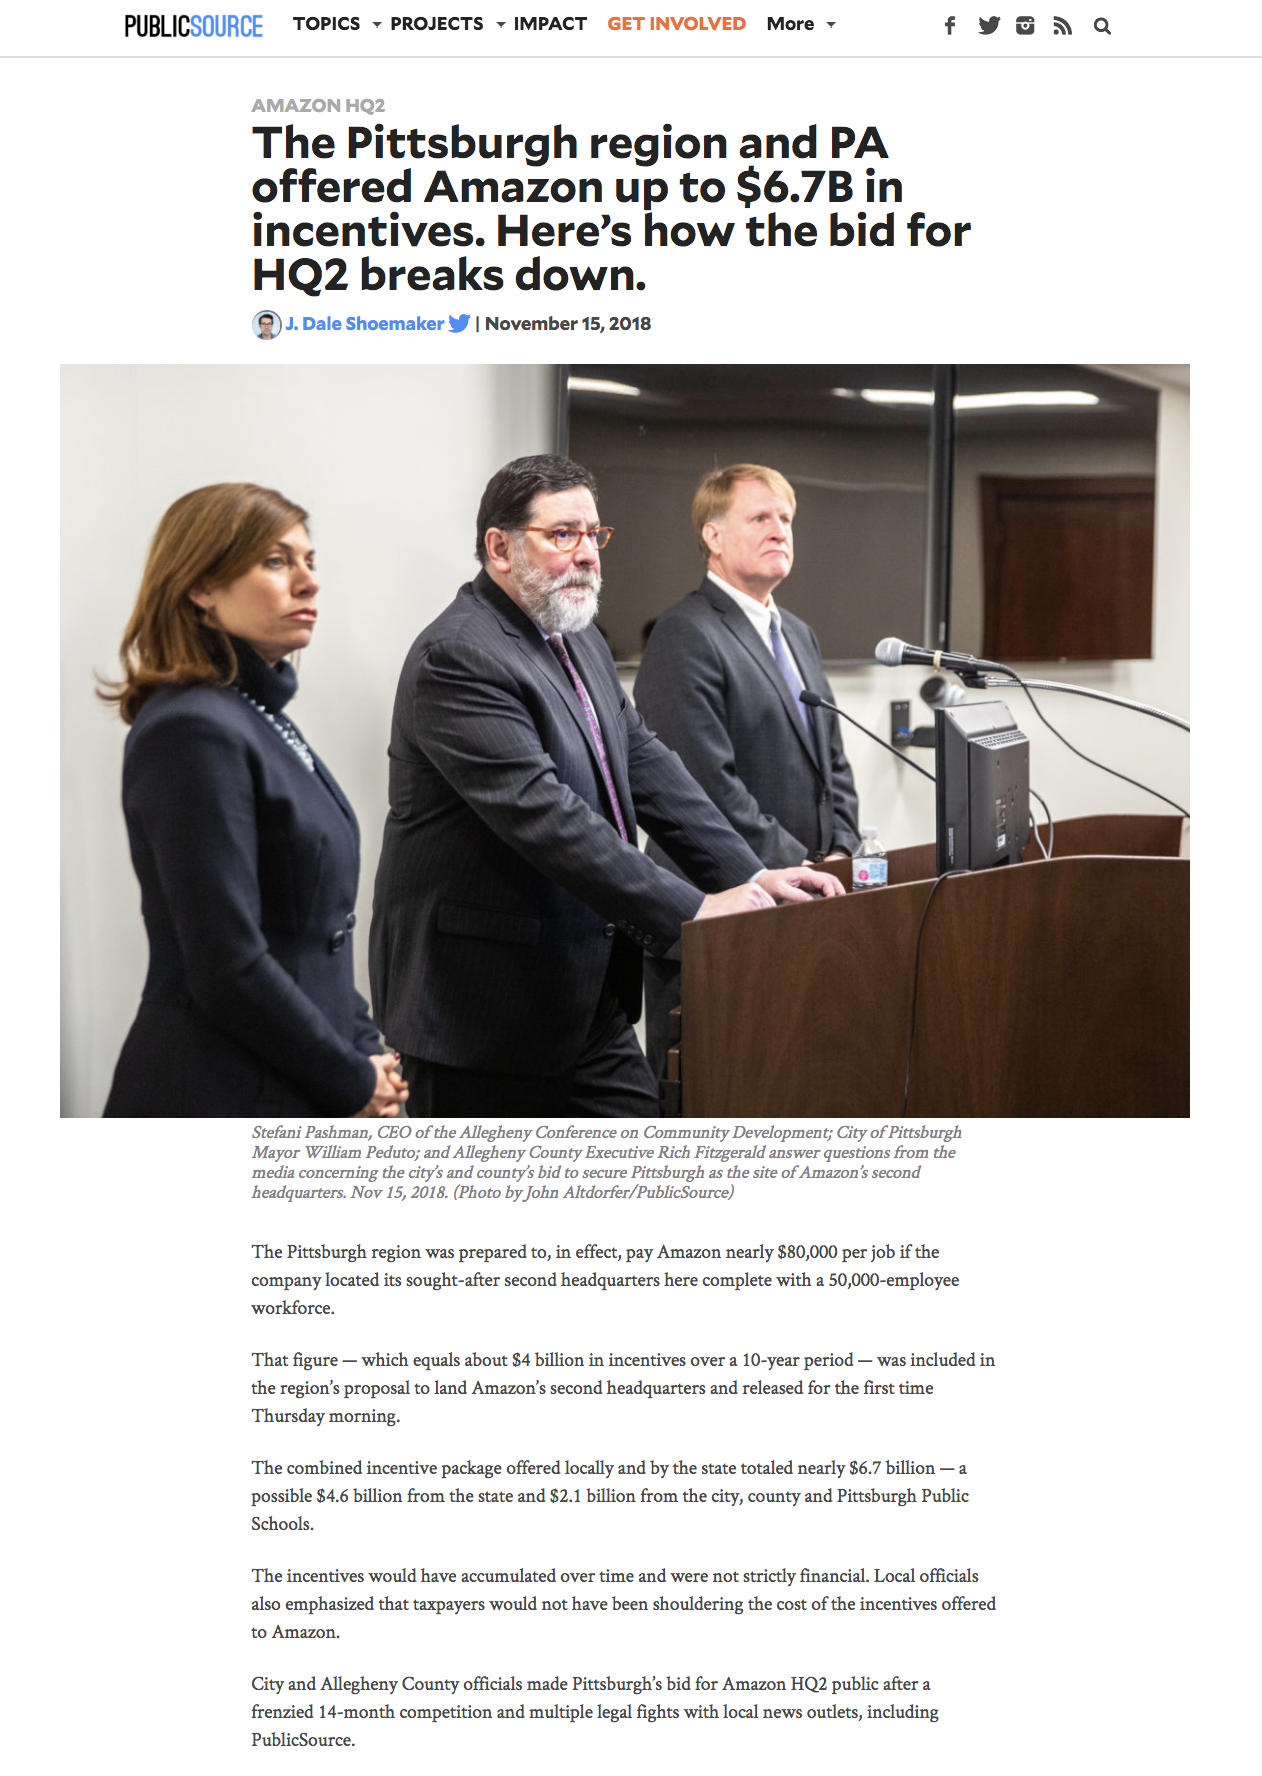 Screenshot of a PublicCourse website story on a bid from Pittsburgh and Pennsylvania to incentivize locating Amazon HQ2 in Pittsburgh.